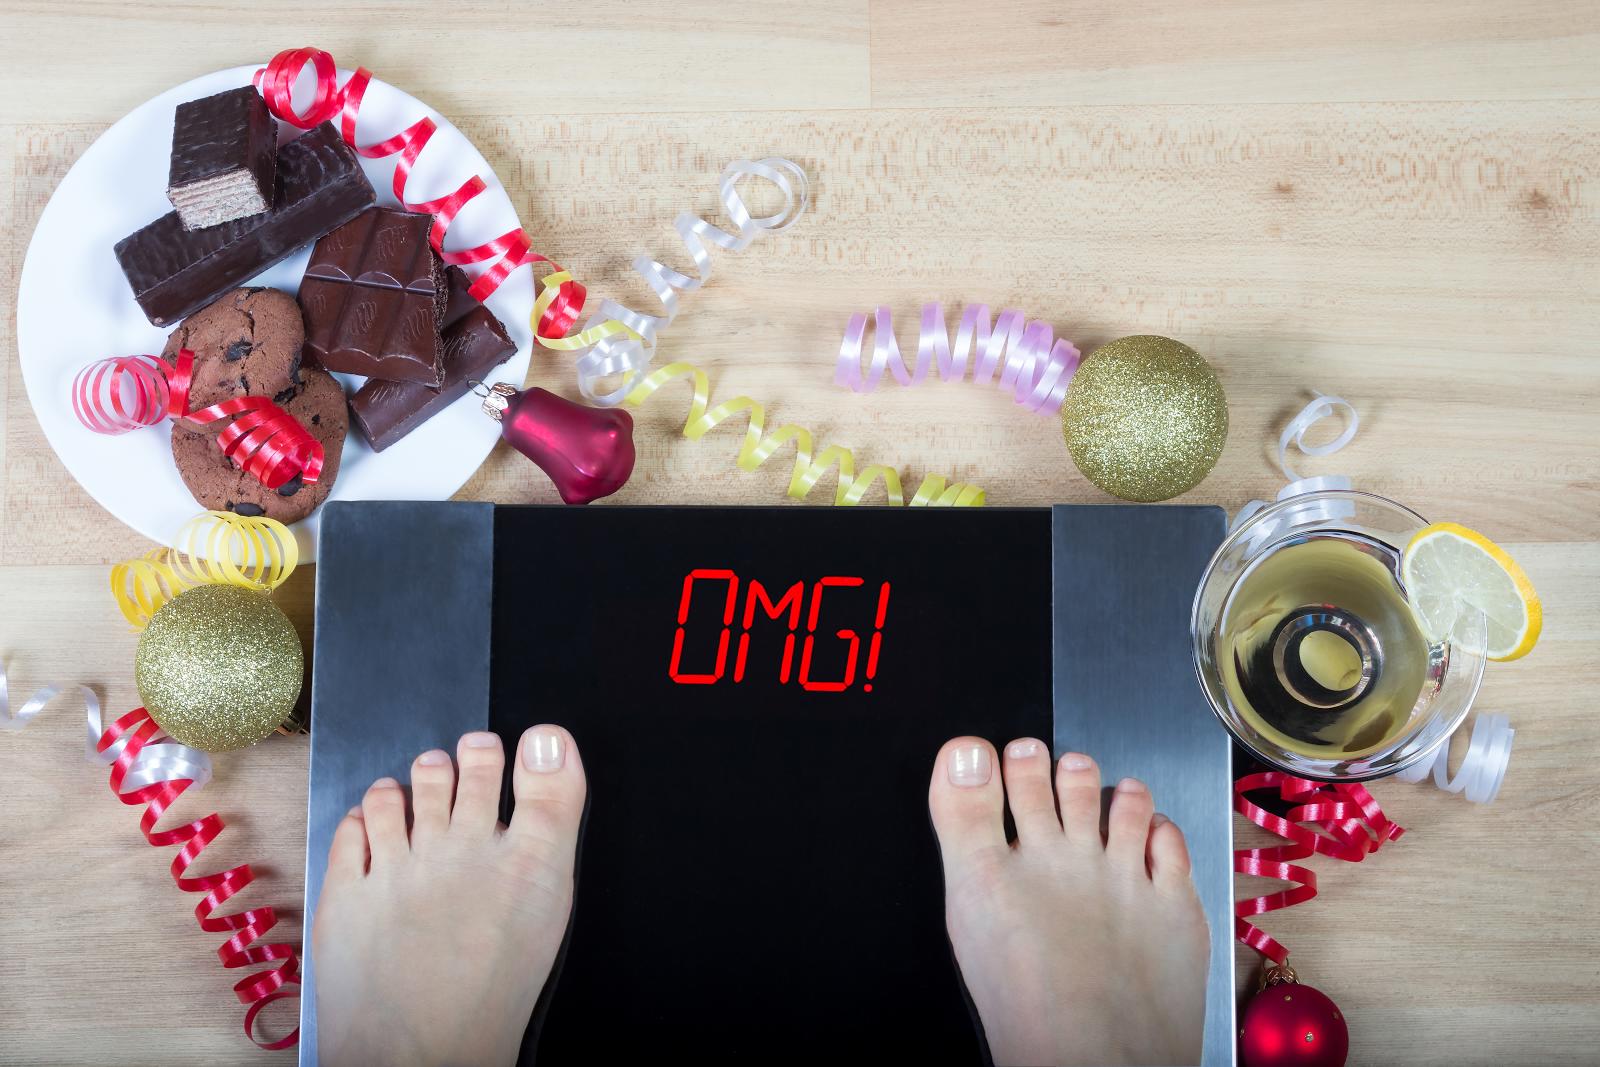 Digital scales with woman feet on them and sign"OMG!" surrounded by christmas decorations, sweets and alchohol. Demonstrates consequences of surfeit and eating unhealthy food during Christmas holidays.